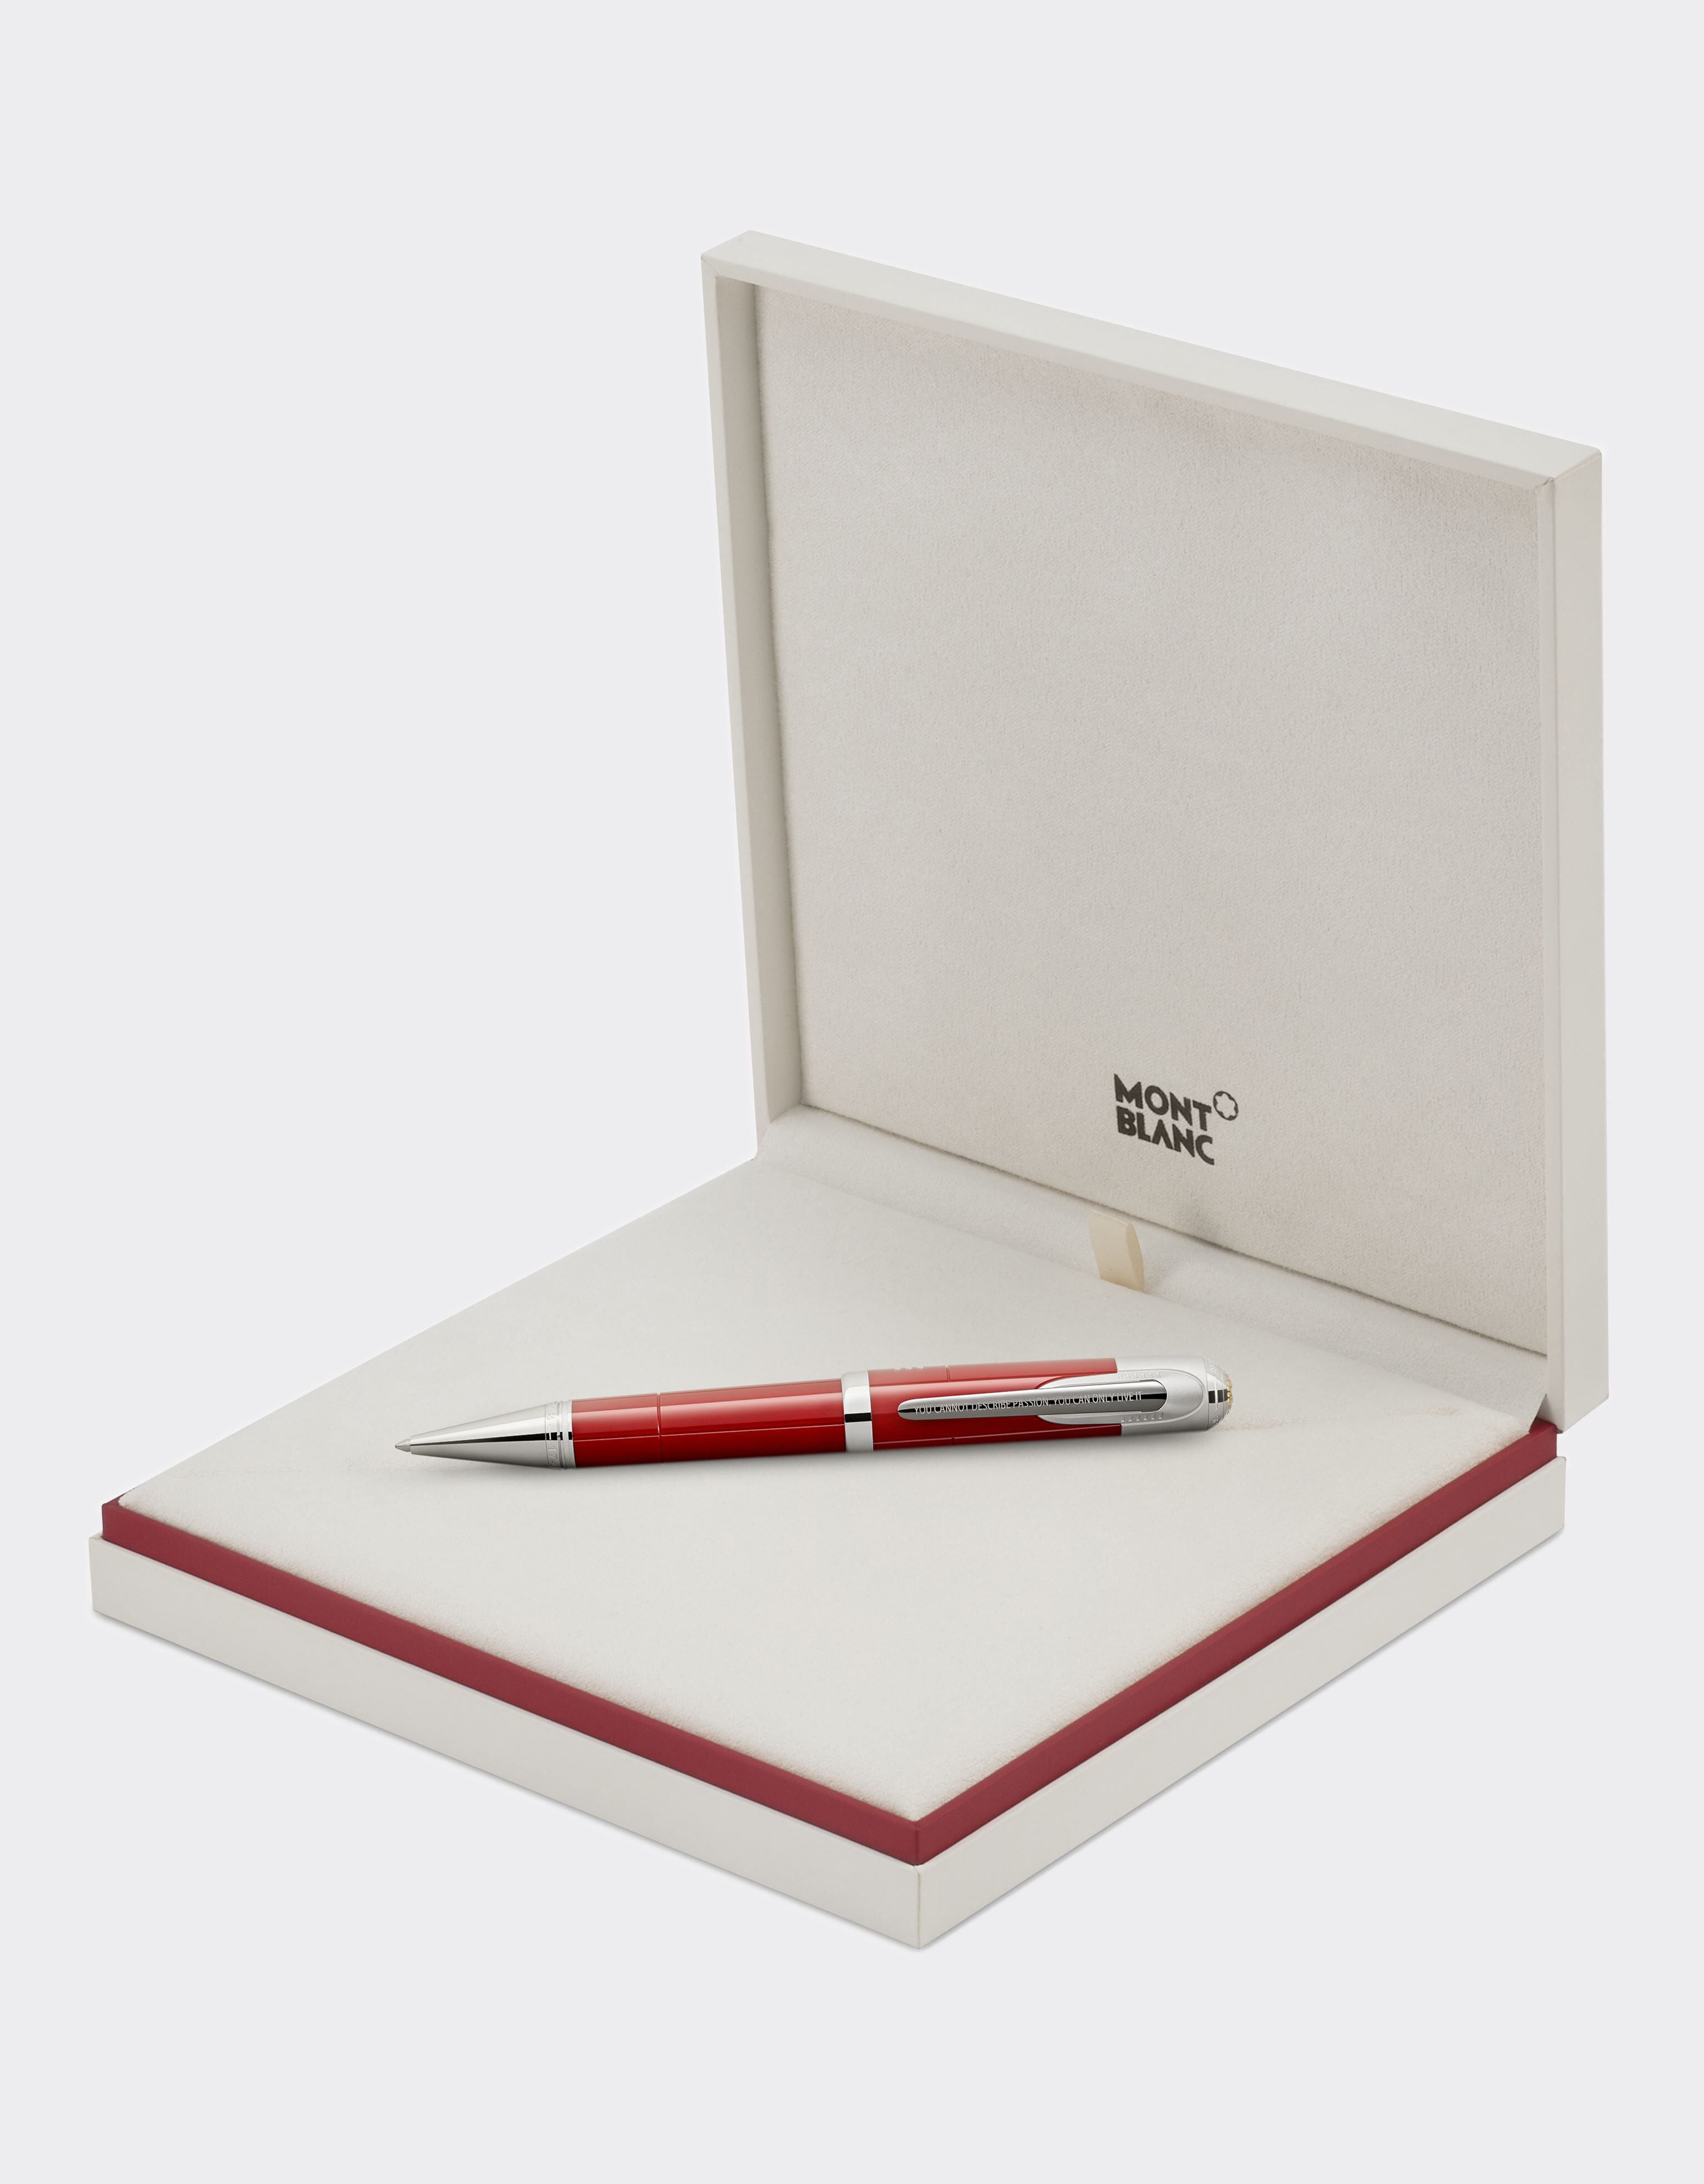 Ferrari Montblanc Great Characters Enzo Ferrari Special Edition ballpoint pen Red F0432f